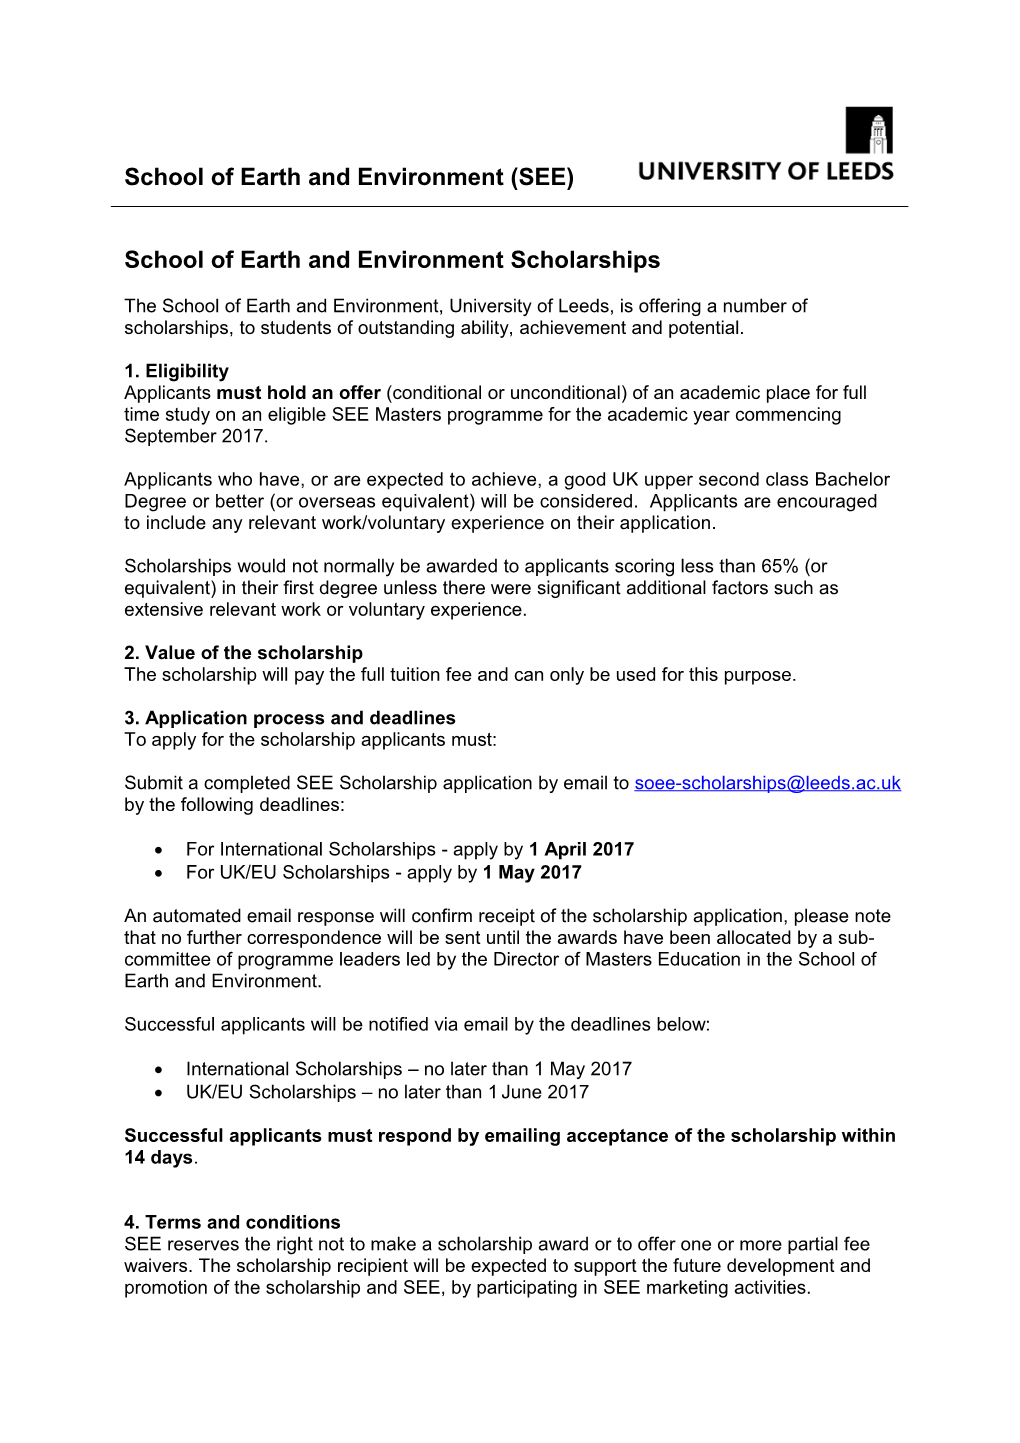 School of Earth and Environment Scholarships